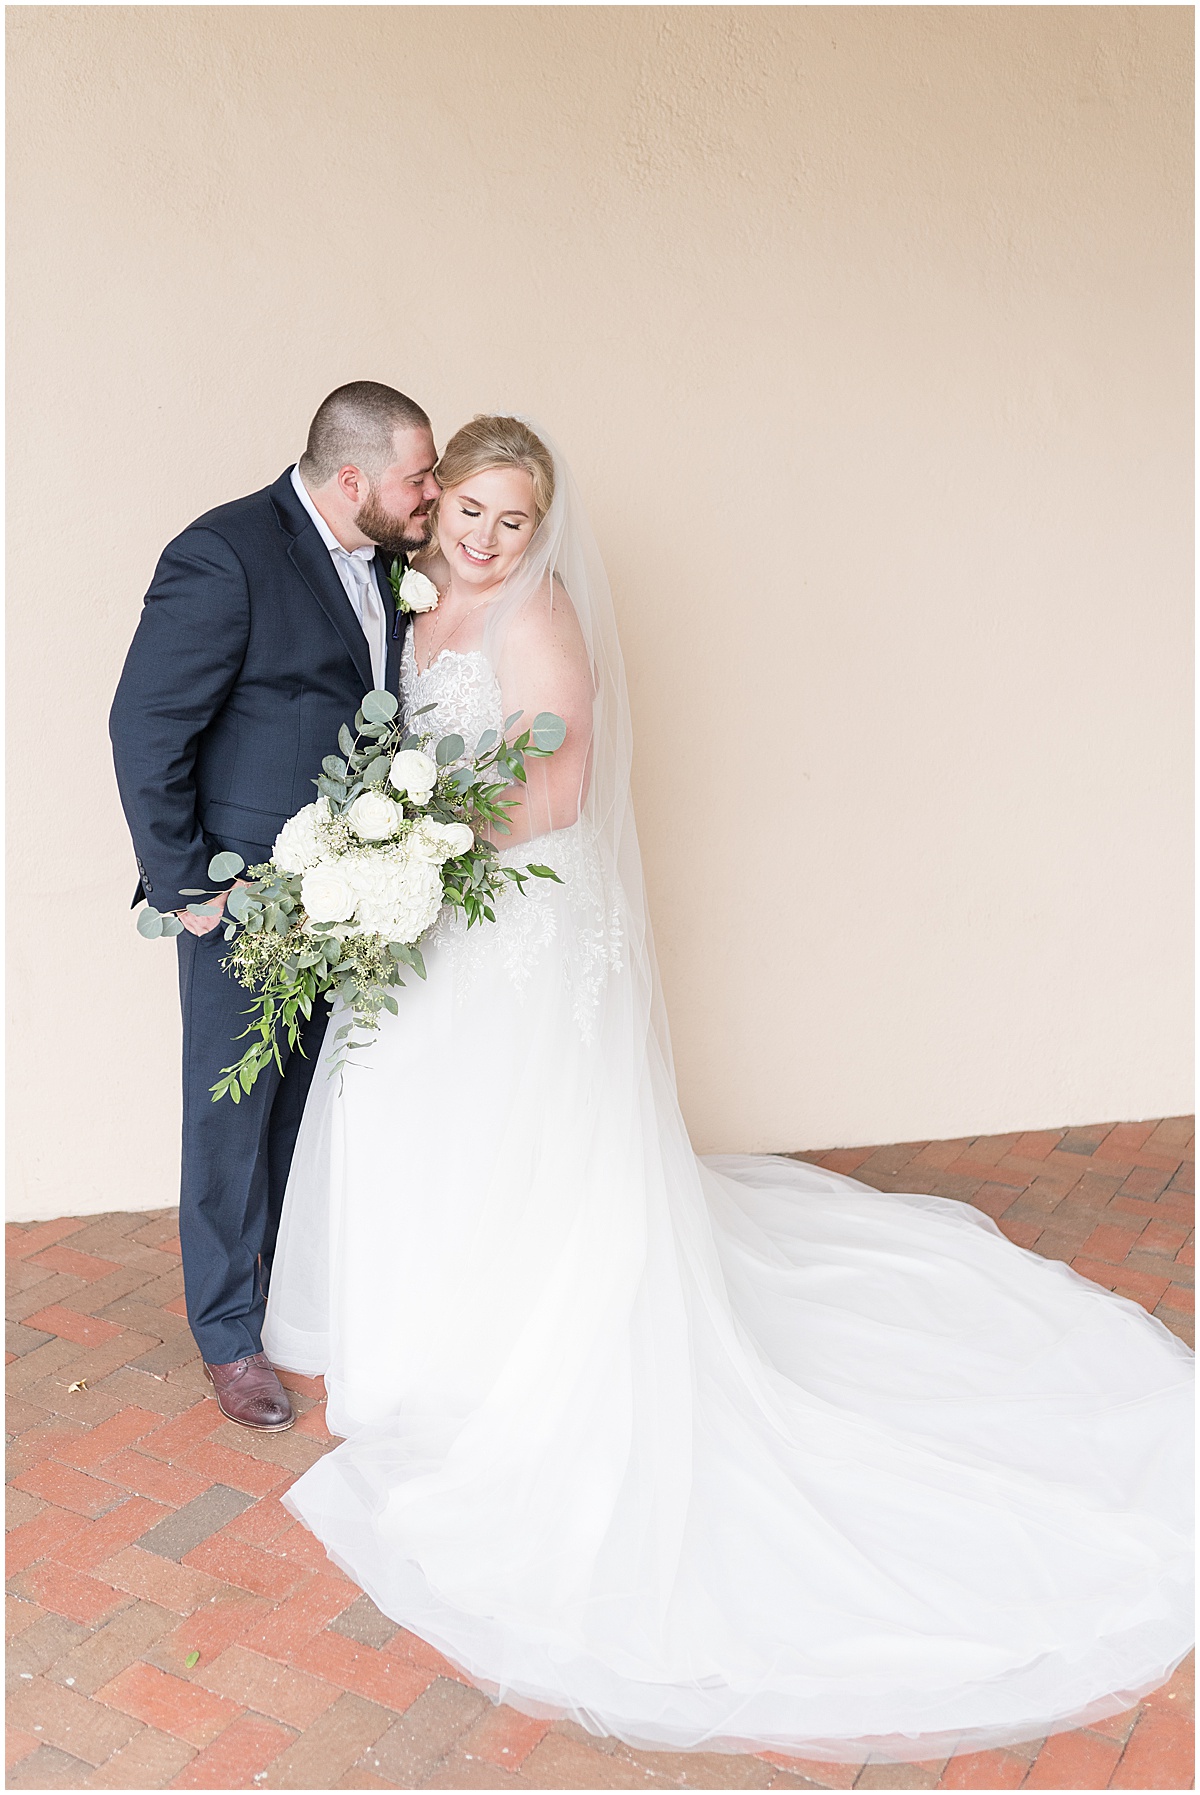 Bride and groom embrace during wedding photos at Fowler House Mansion